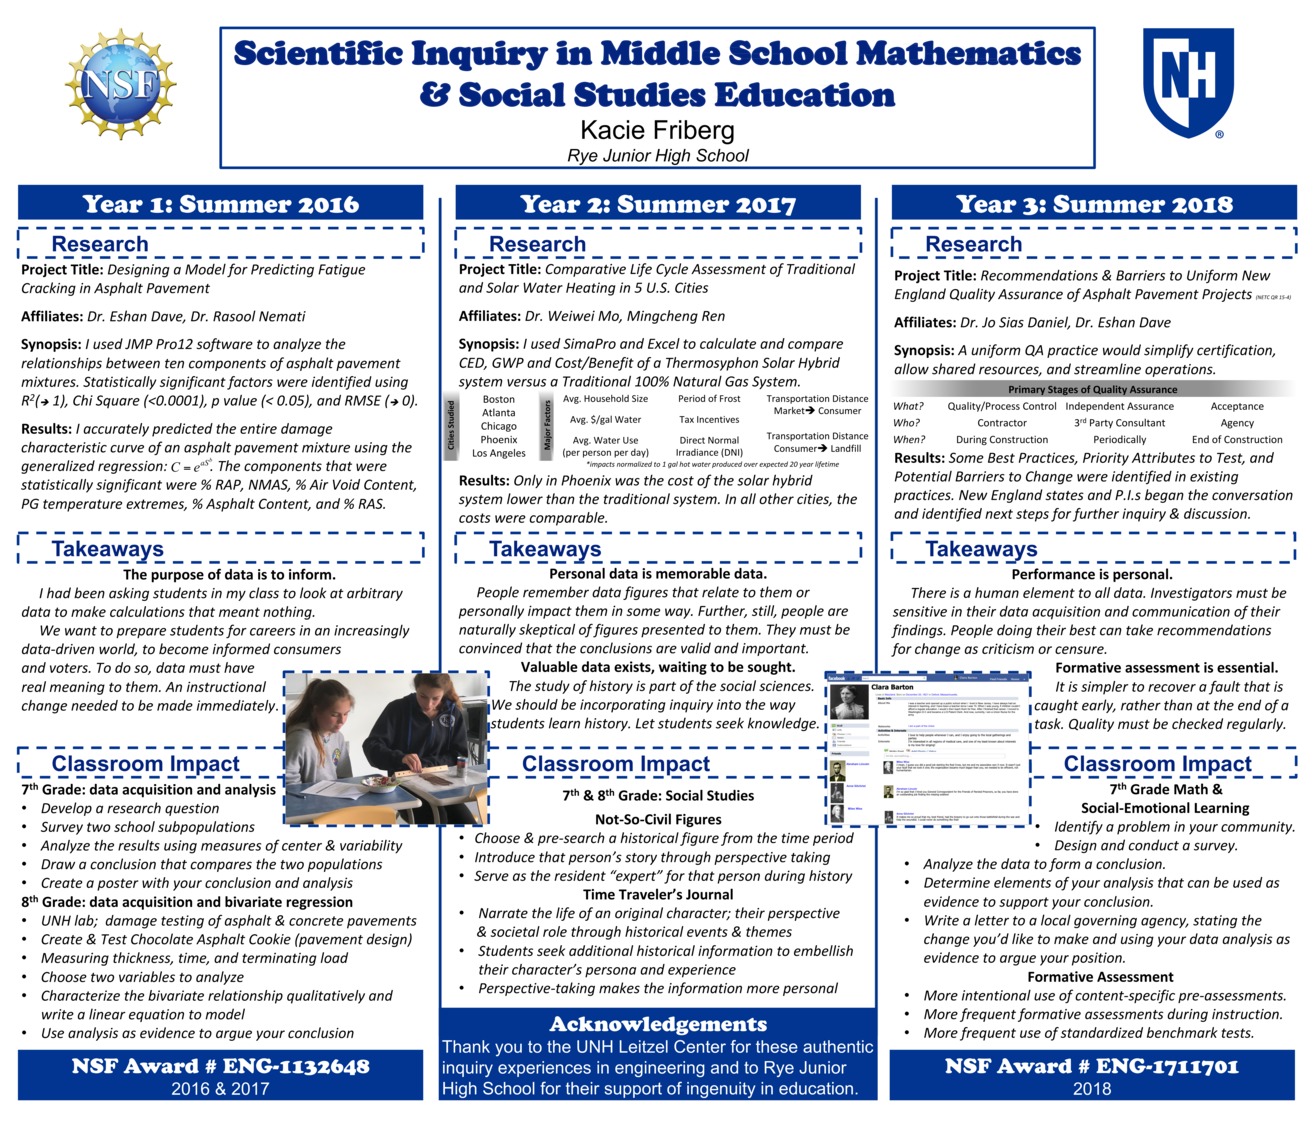 Scientific Inquiry In Middle School Mathematics & Social Studies Education by knk5